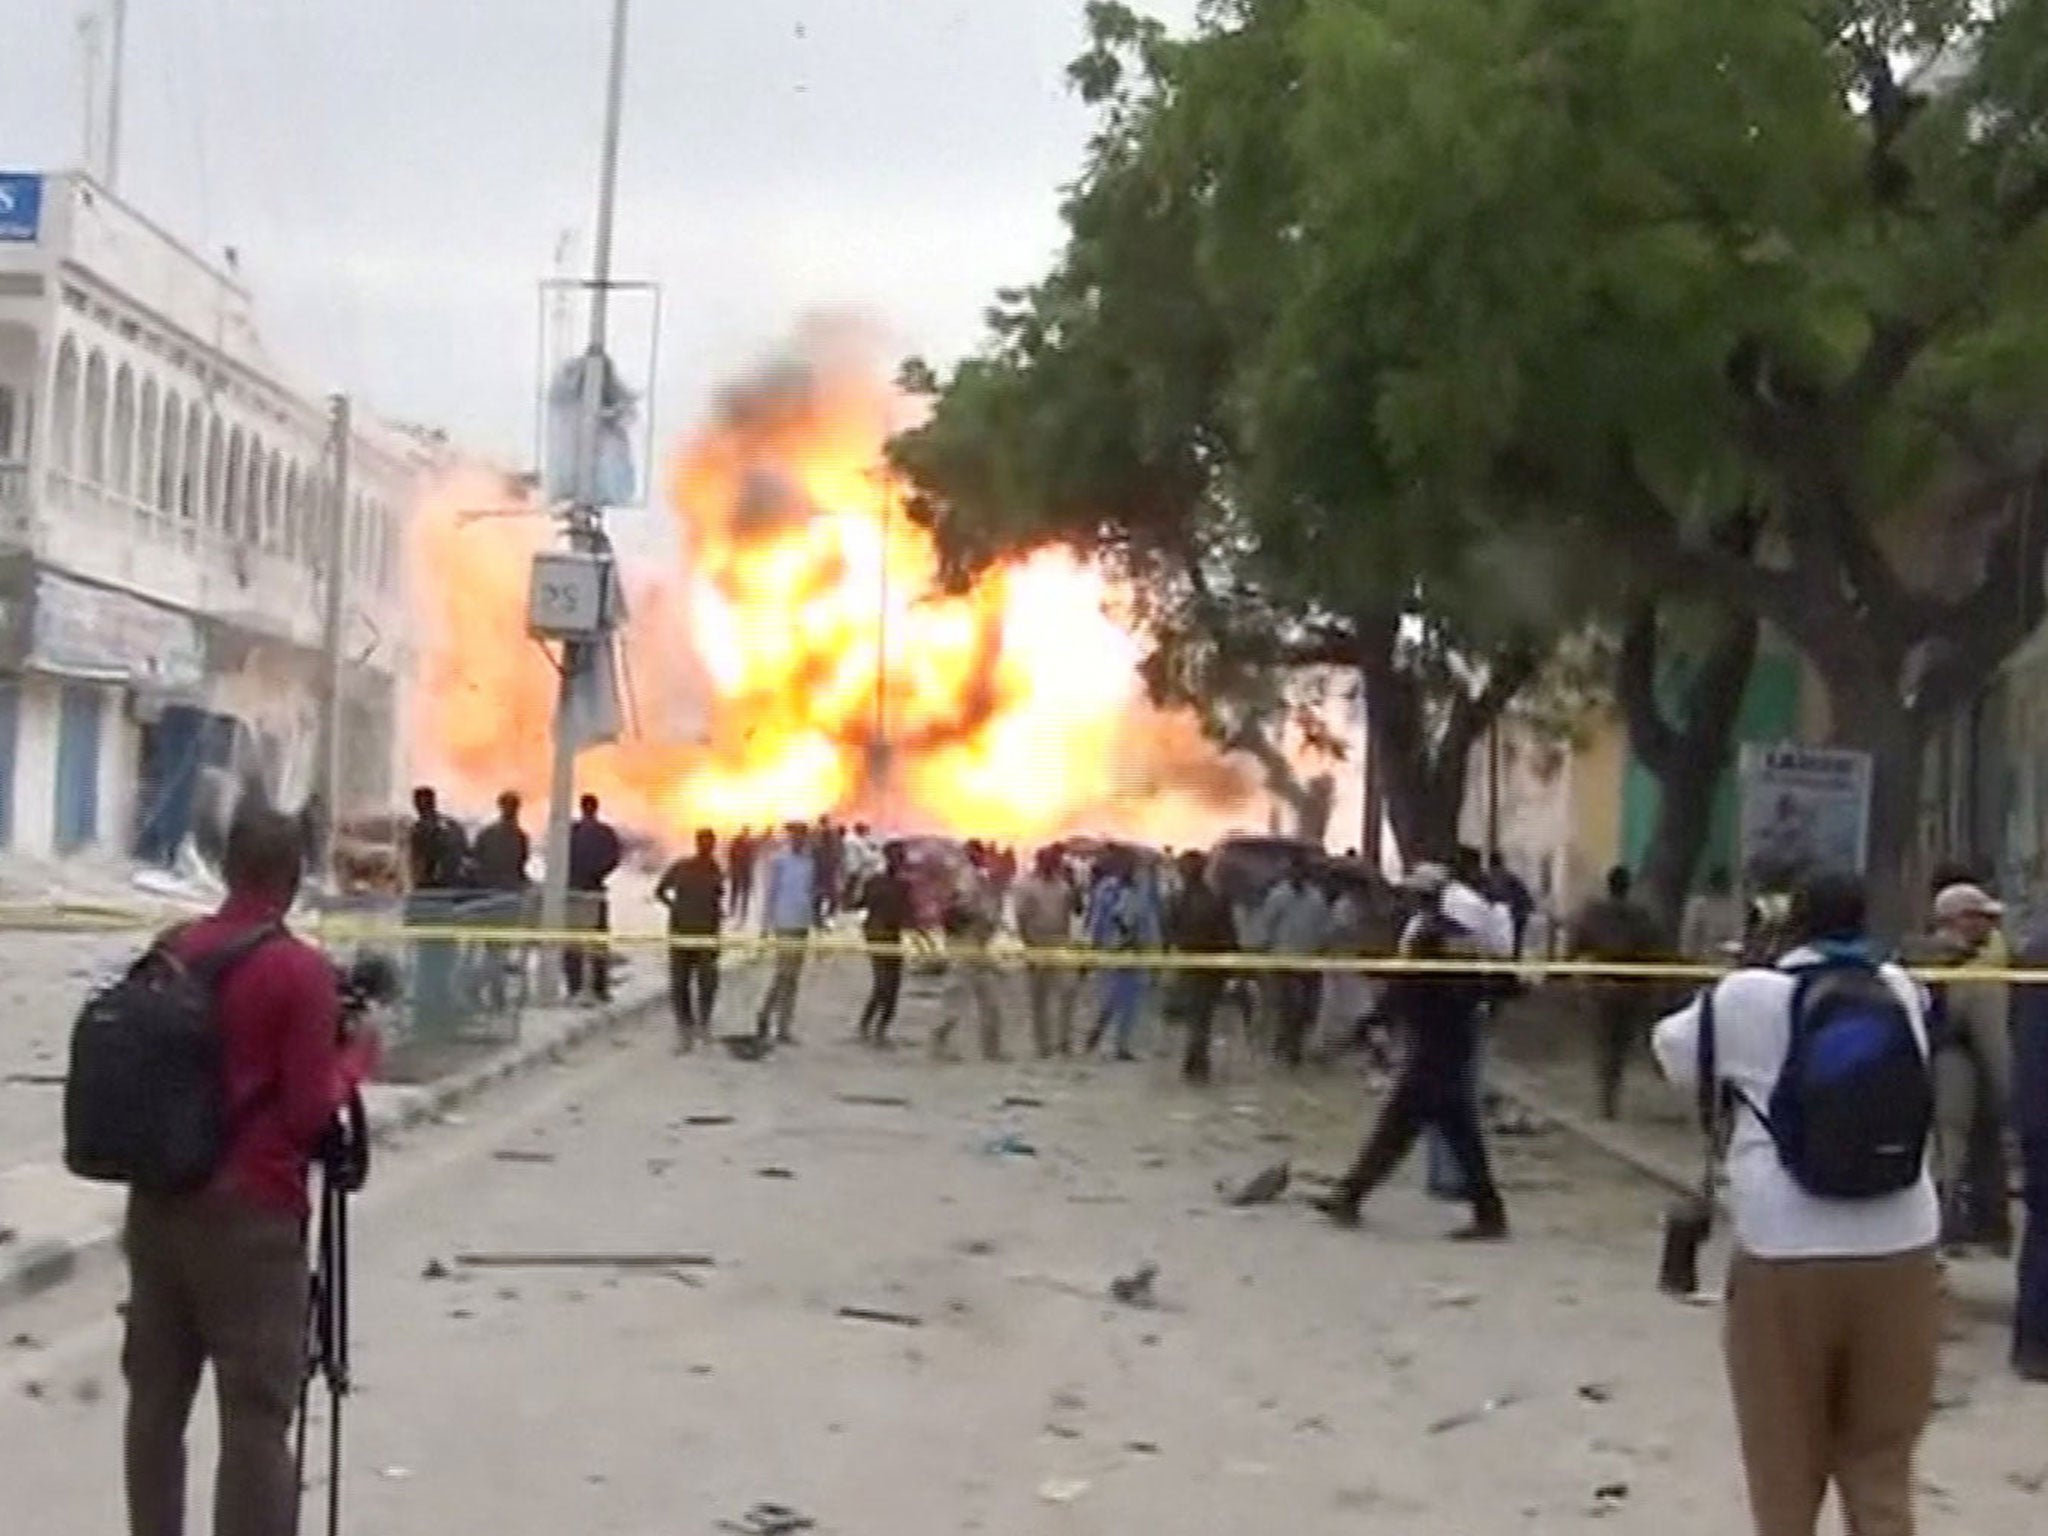 A still from a Reuters TV video shows a secondary explosion after a suspected suicide car bomb rammed into the gates of a hotel in Mogadishu, Somalia 25 January, 2017